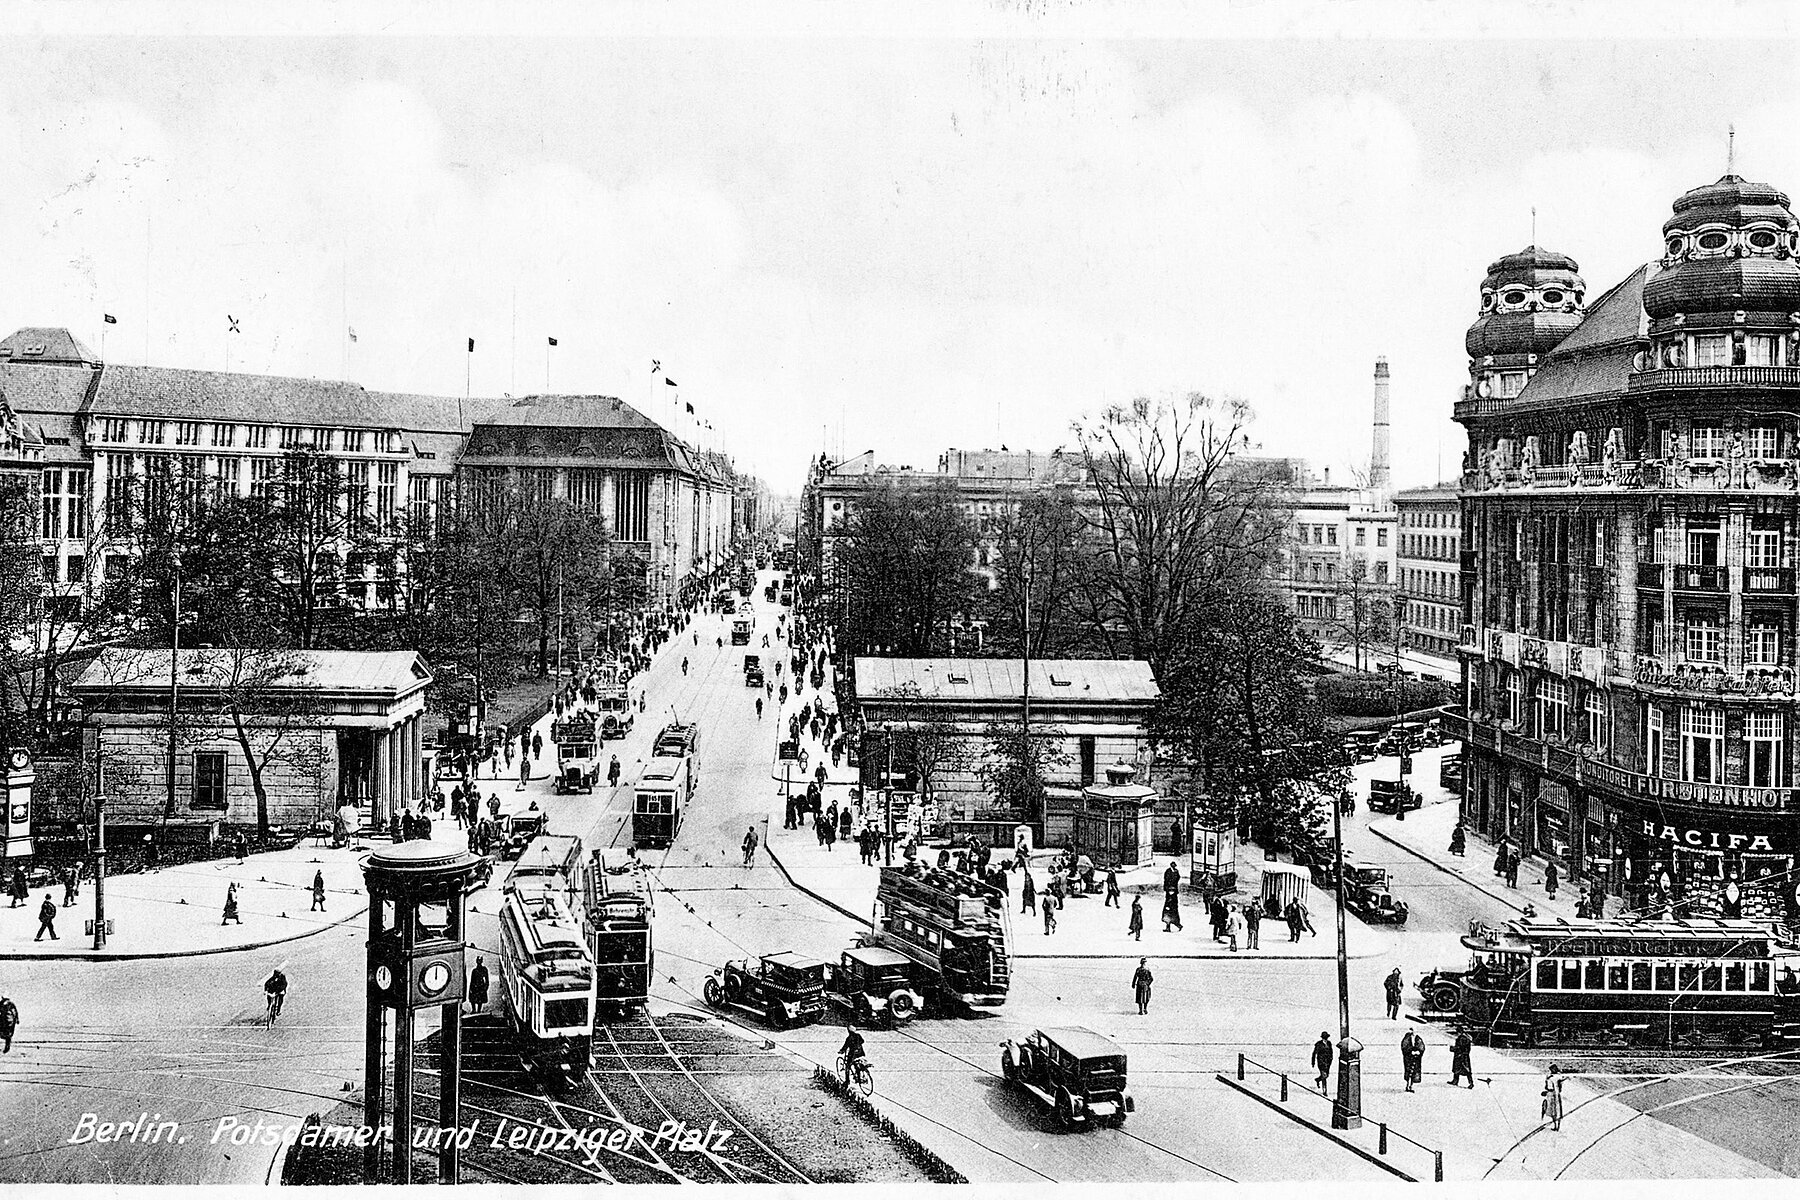 Historical postcard of a street scene at Potsdamer Platz with traffic lights, tram traffic and cars in the foreground, surrounding various buildings.